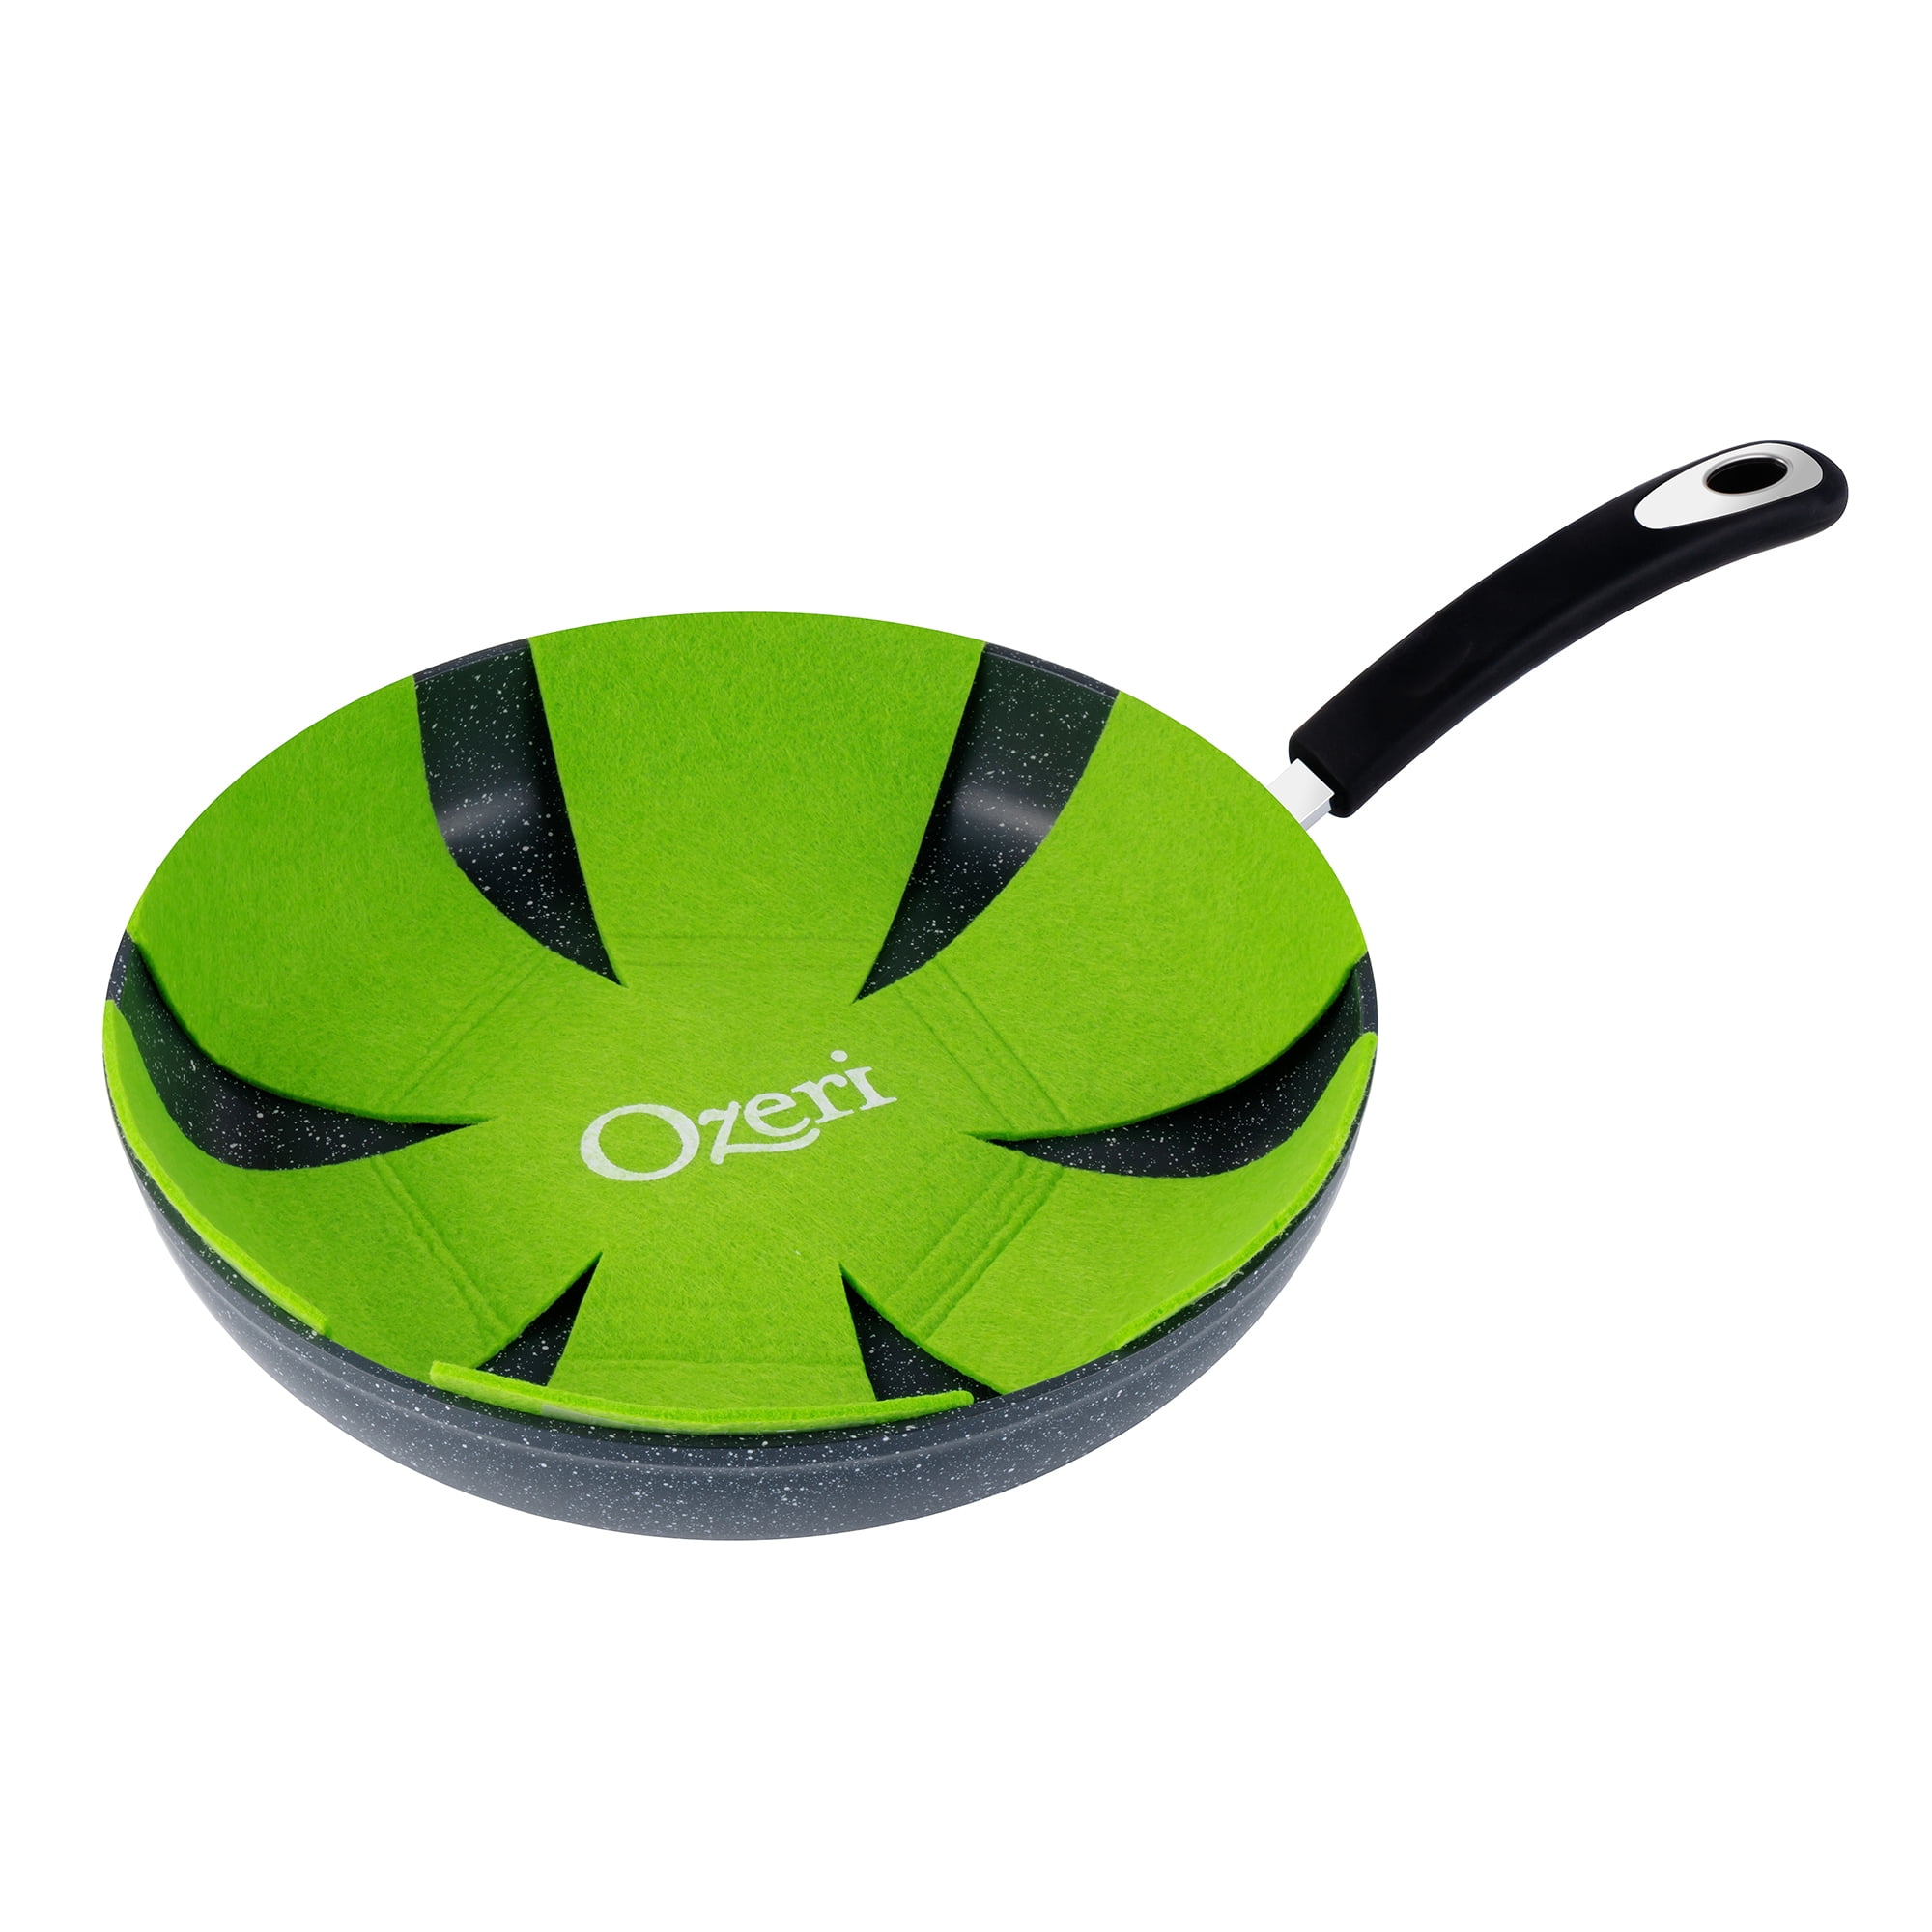 My Review Love!!: Ozeri Green Earth Pan to Ease Home Cooking!  #HolidayGiftGuide #FryingPan